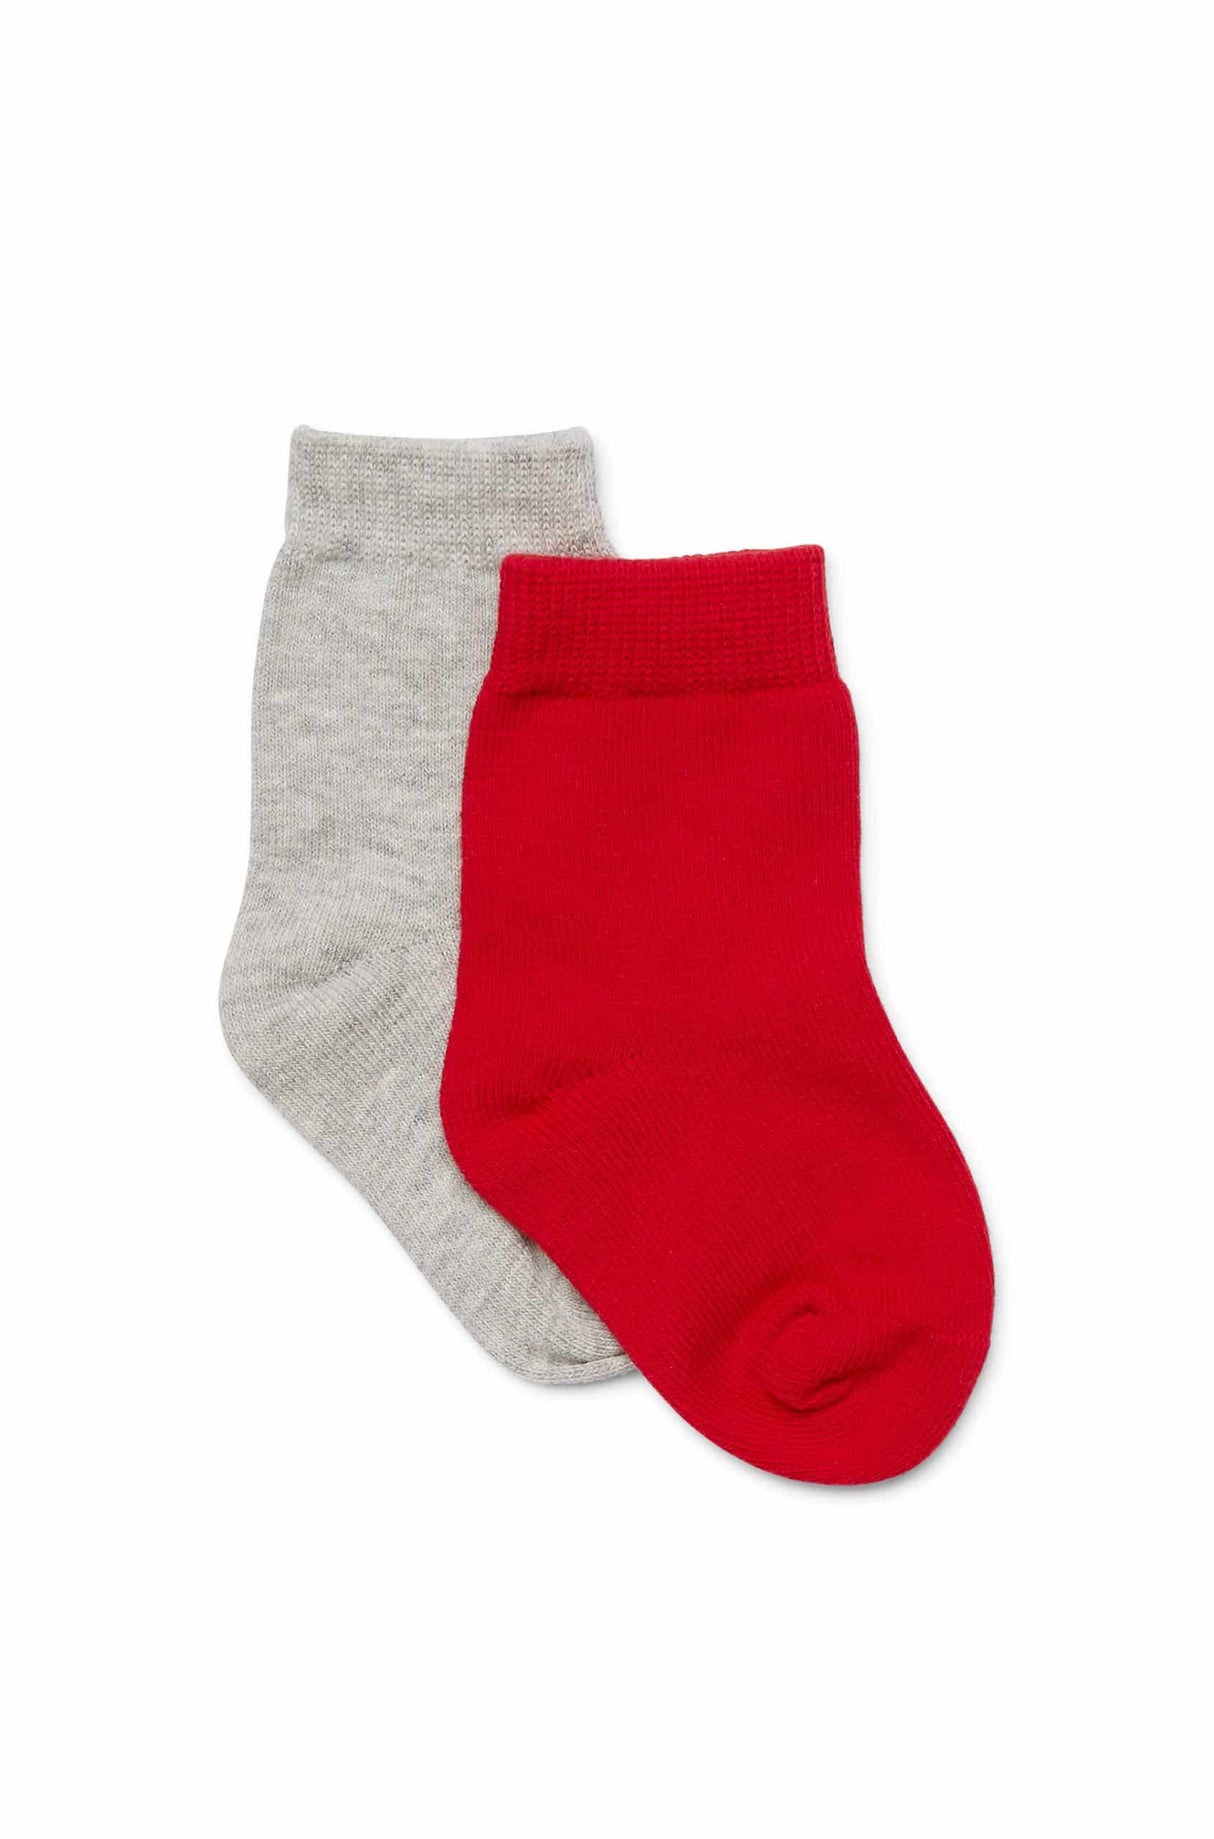 Red and Grey Socks 2 Pack